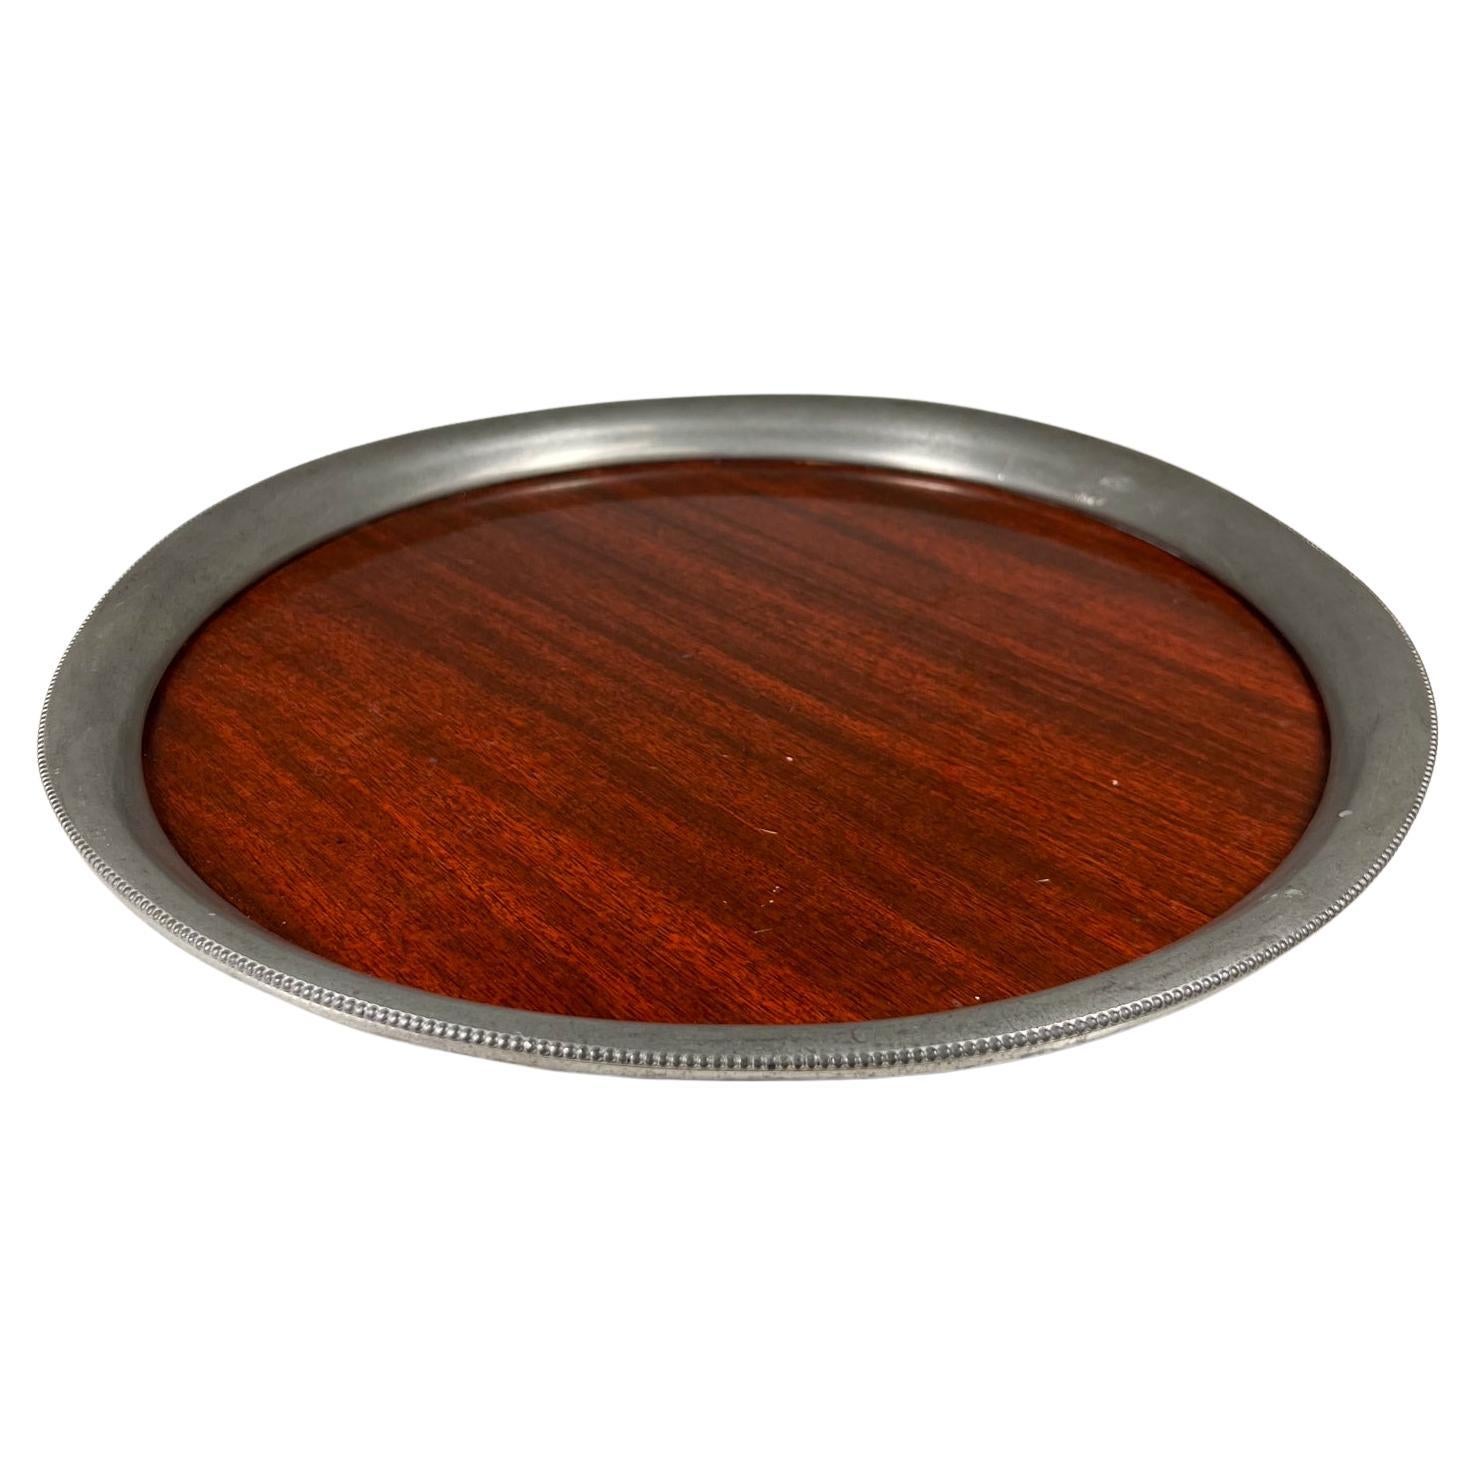 1970s Modern Vintage Revere Pewter Serving Tray Plate in Faux Wood For Sale